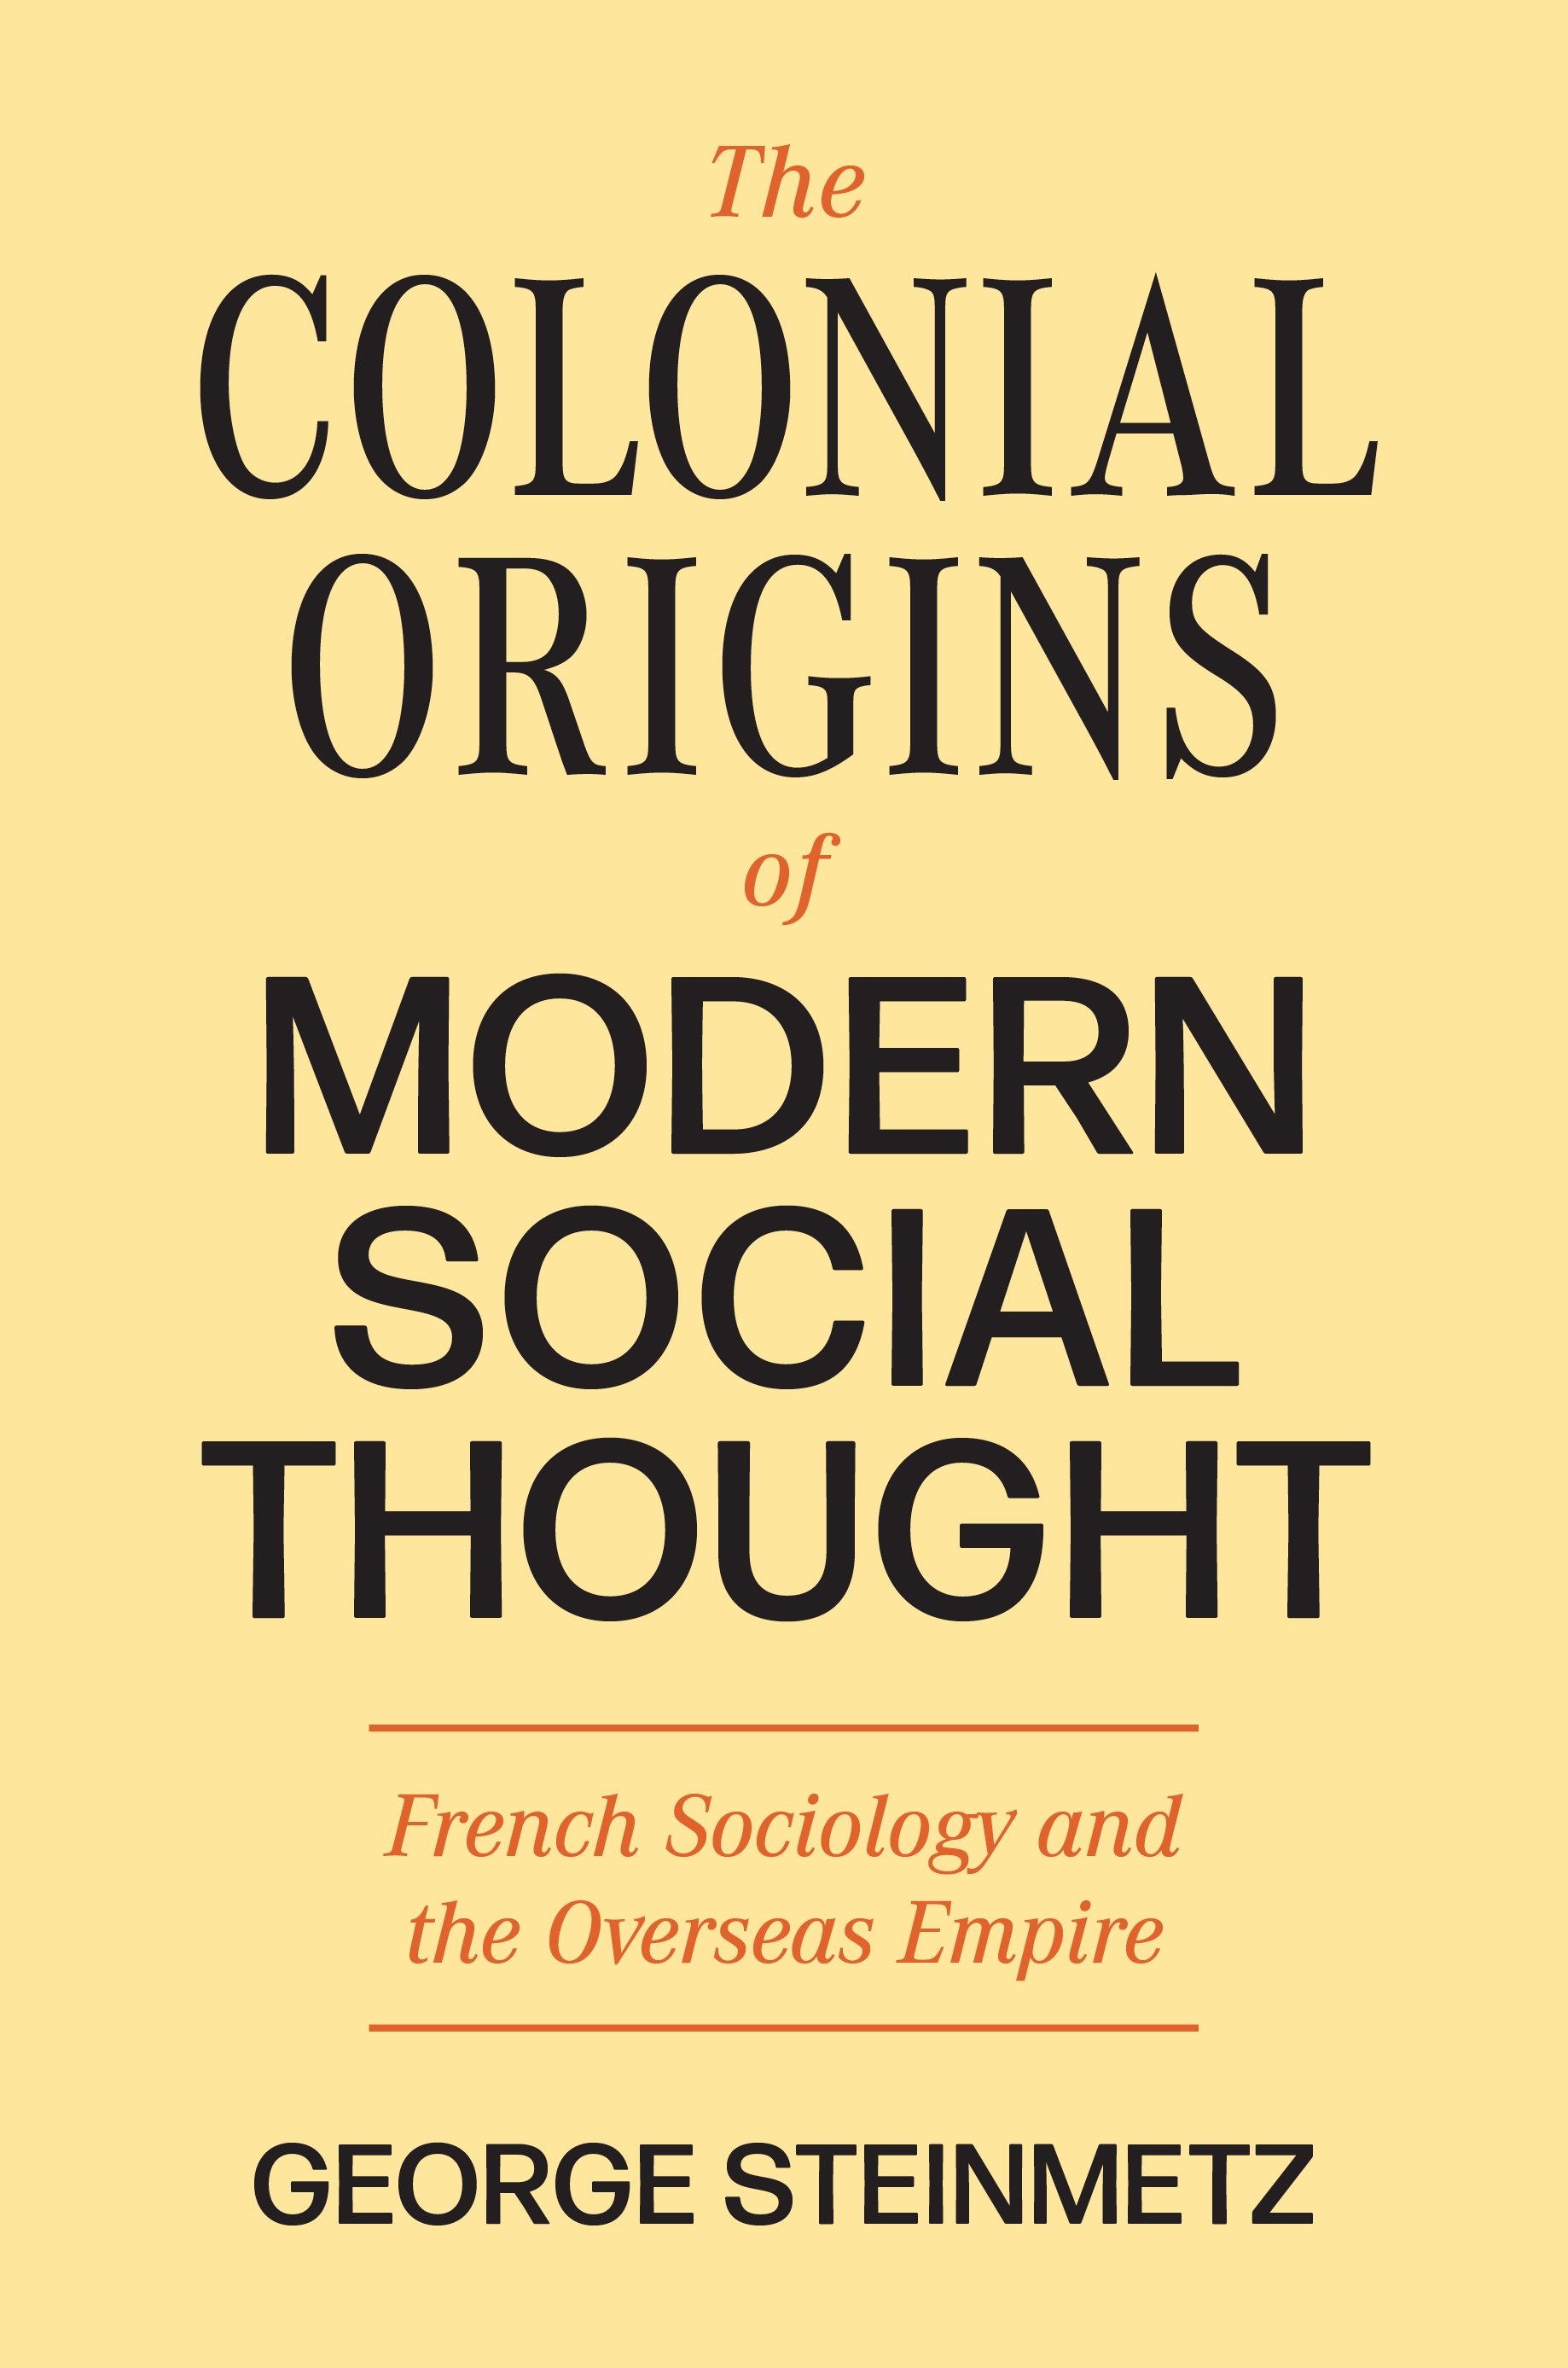 Origins　of　The　Social　Thought　Princeton　Colonial　Press　Modern　University